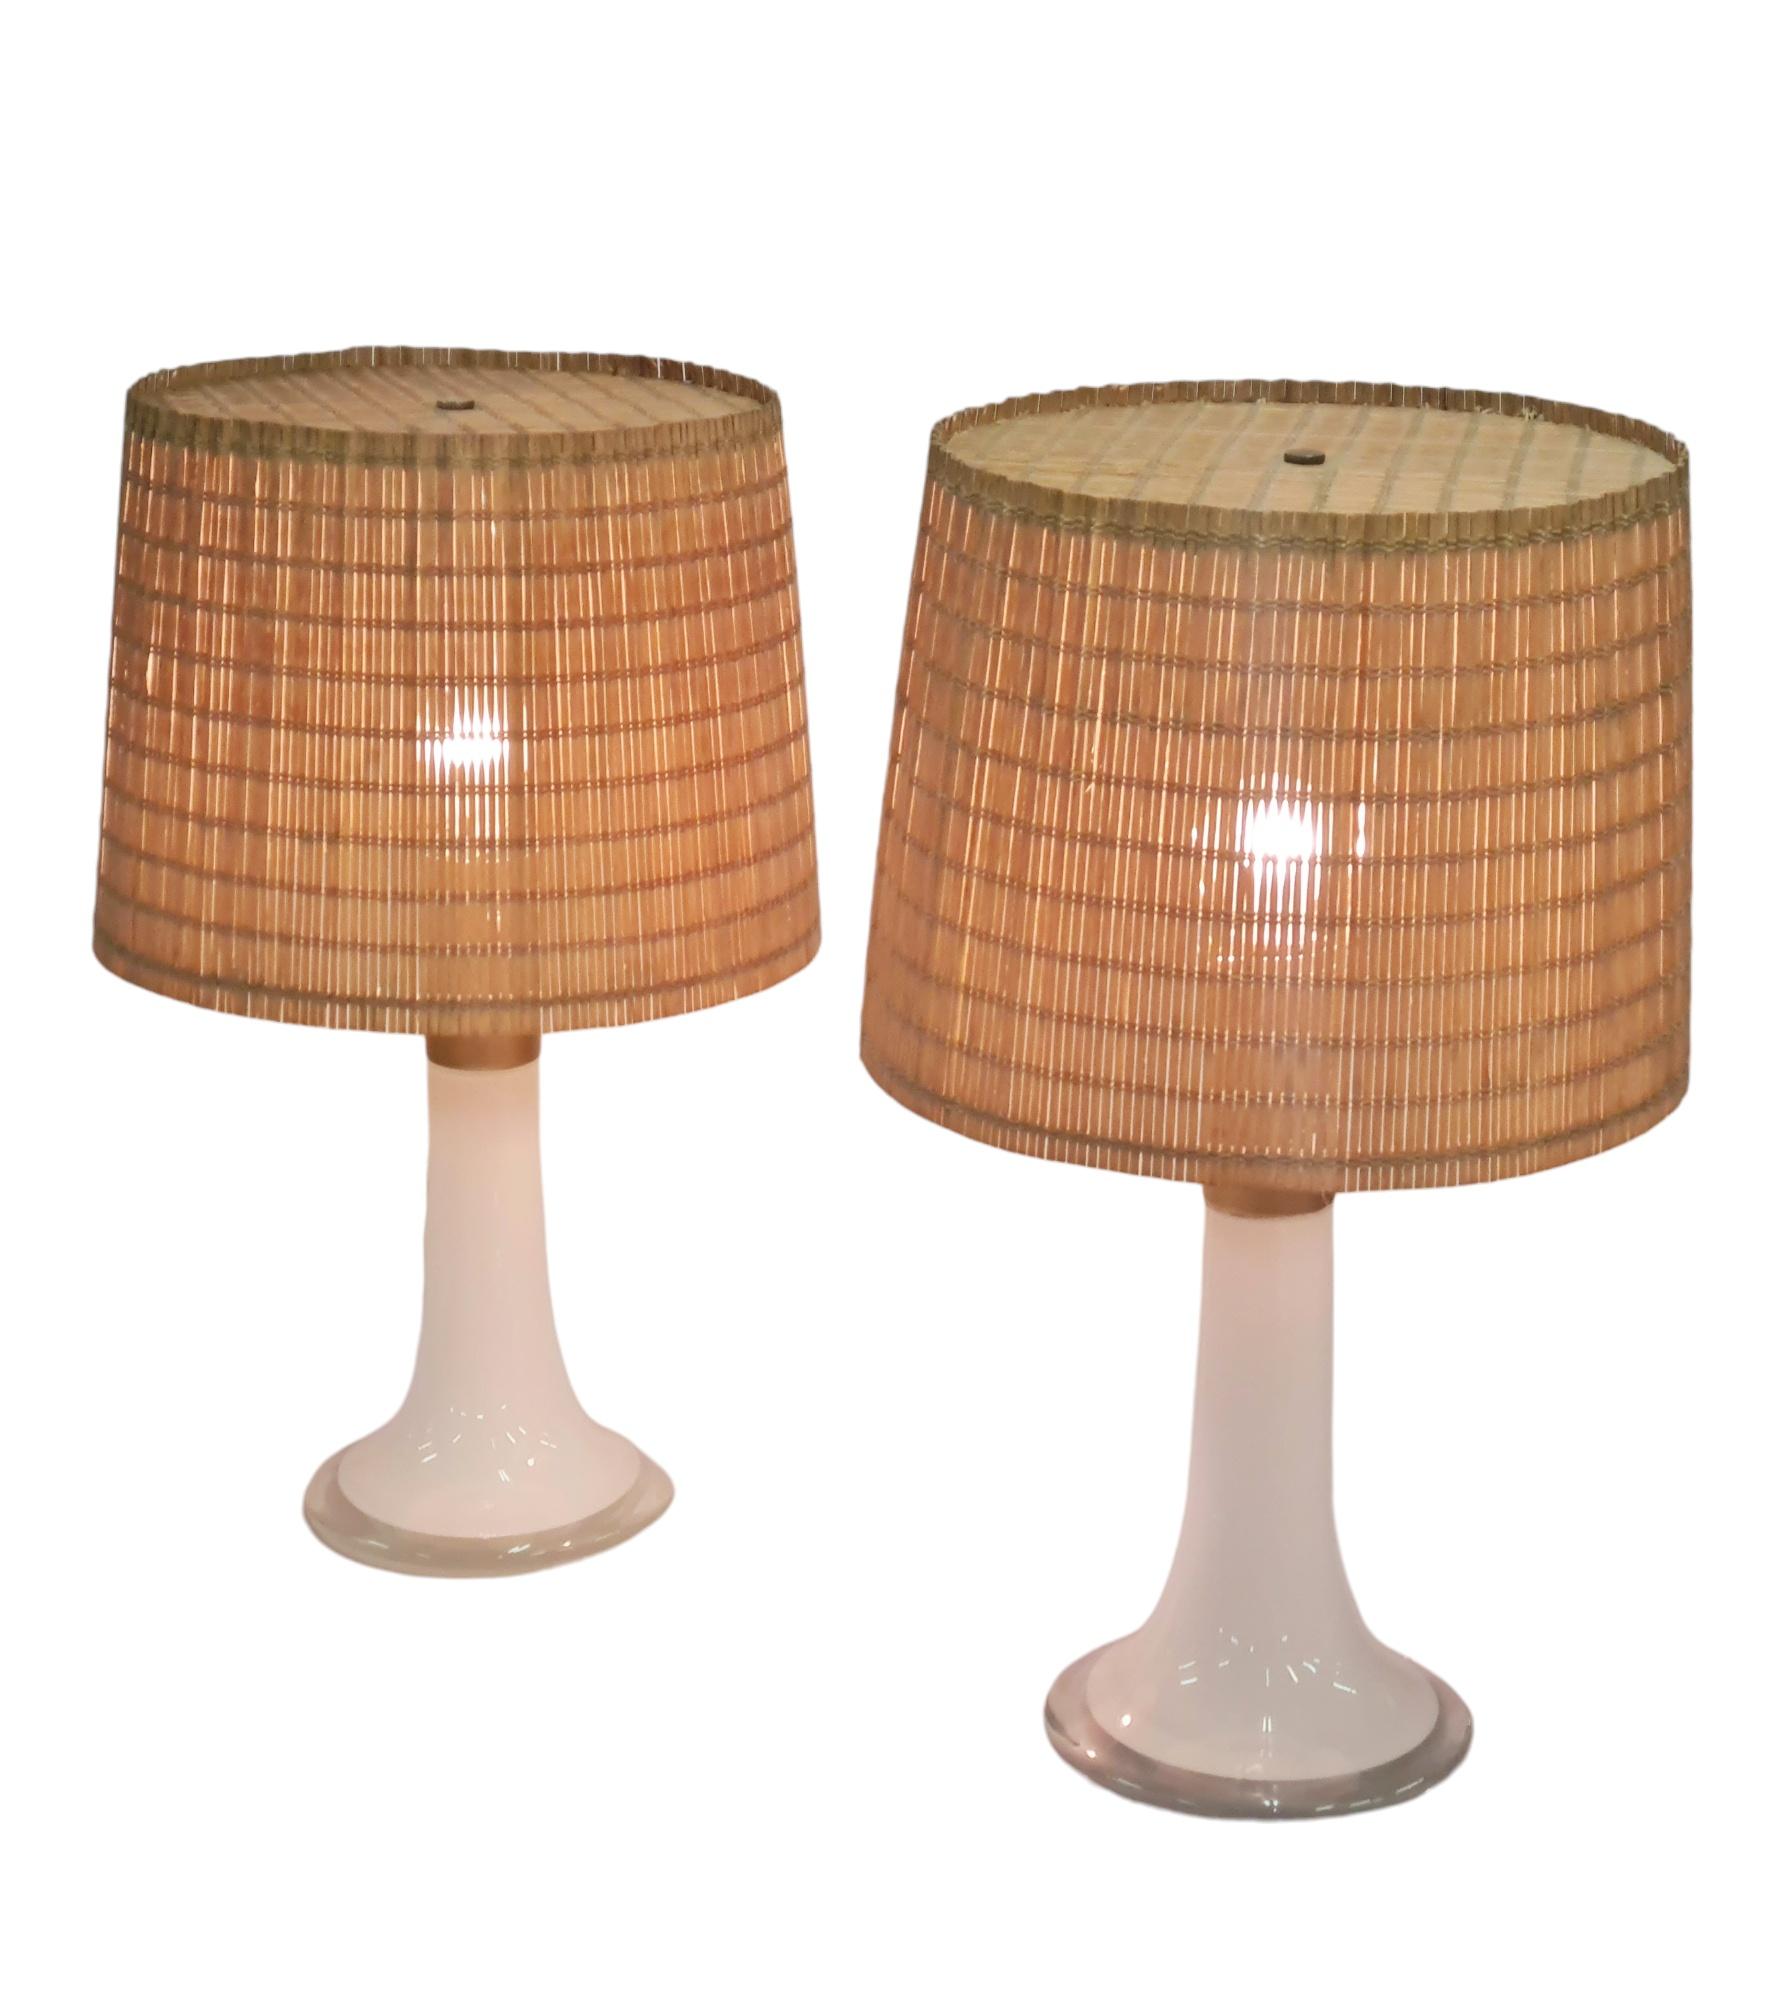 A pair of table lamps model 46-017 in metal and opaline glass designed by Lisa Johansson-Pape and manufactured by Orno Oy In Finland in the 1960s. This simple yet elegant design is one of the most well known designs from the renowned Lisa